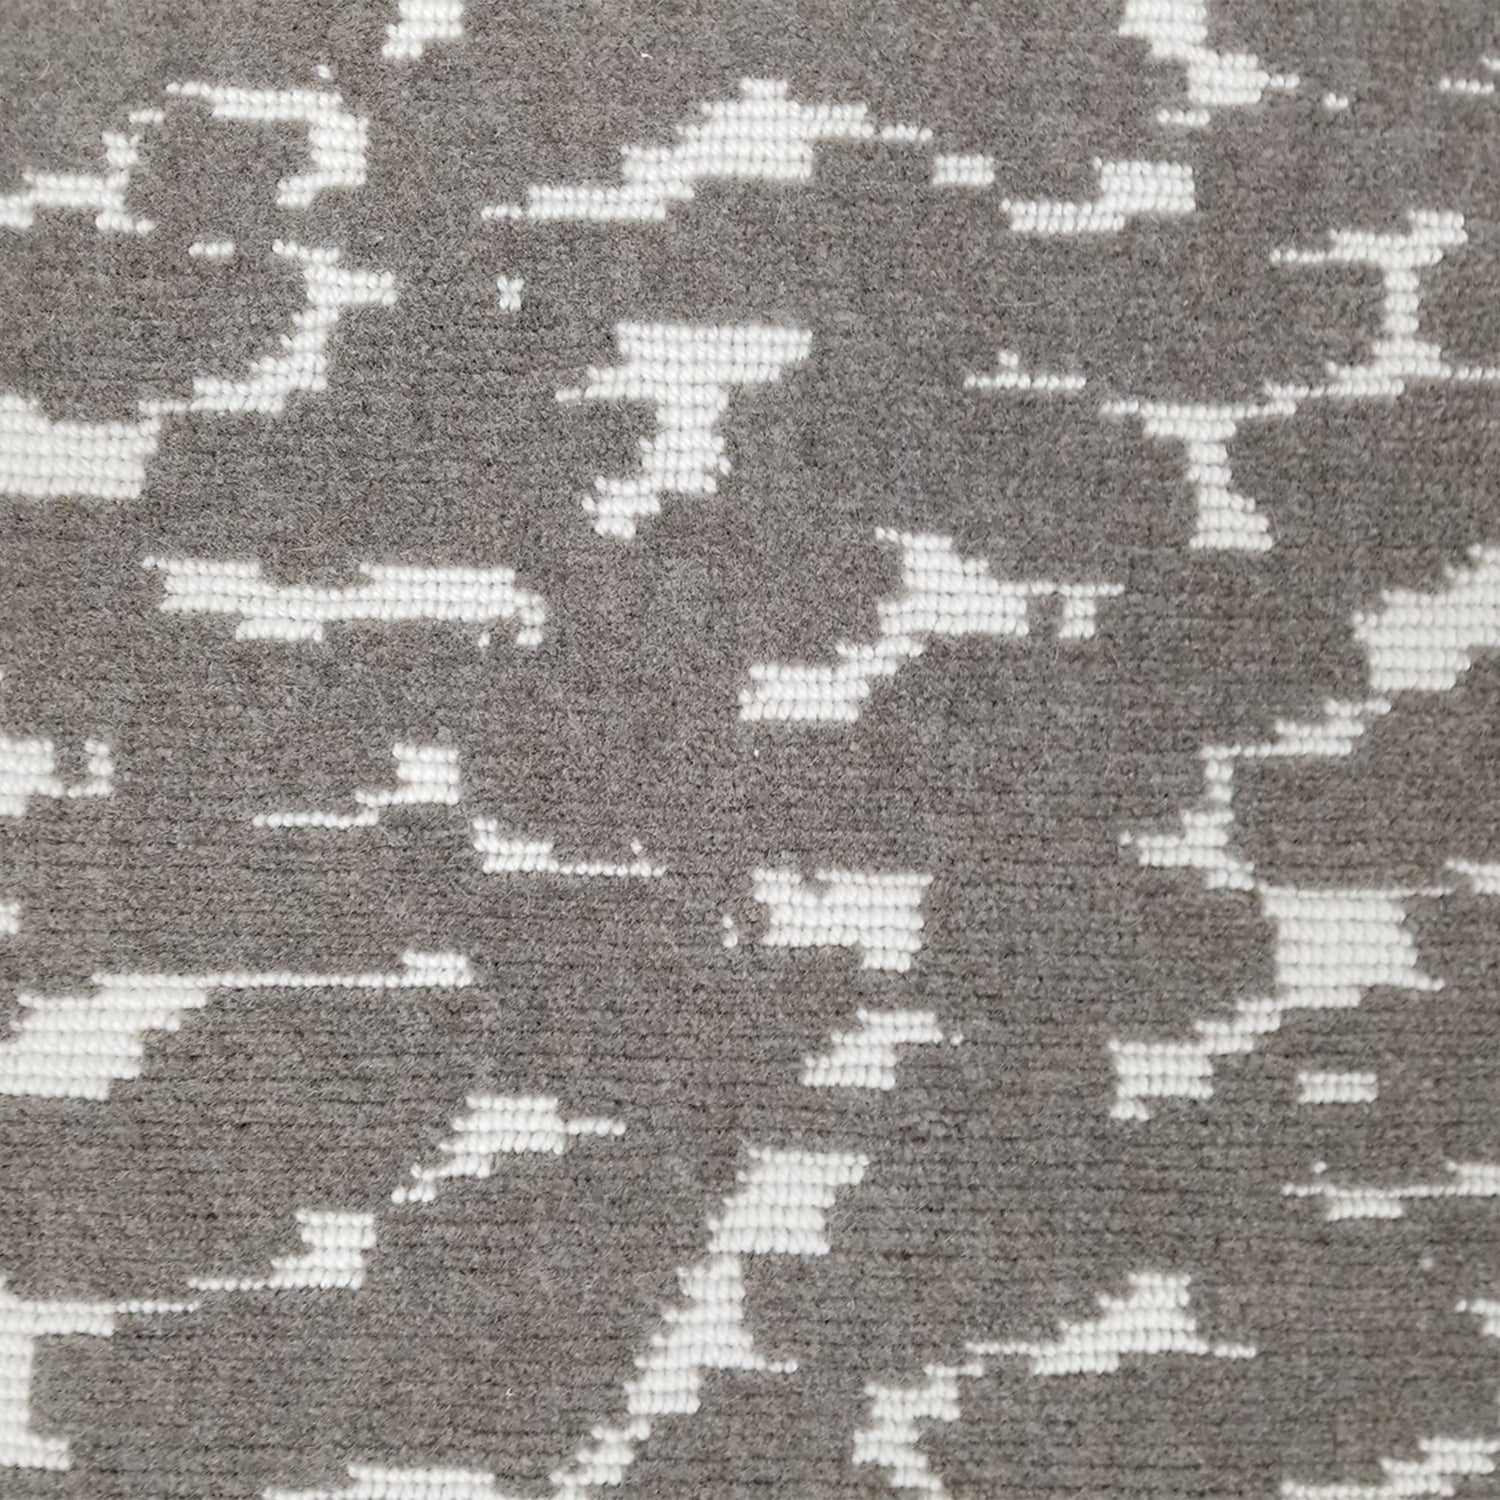 Wool broadloom carpet swatch in a woven cloud pattern in gray with cream accents.